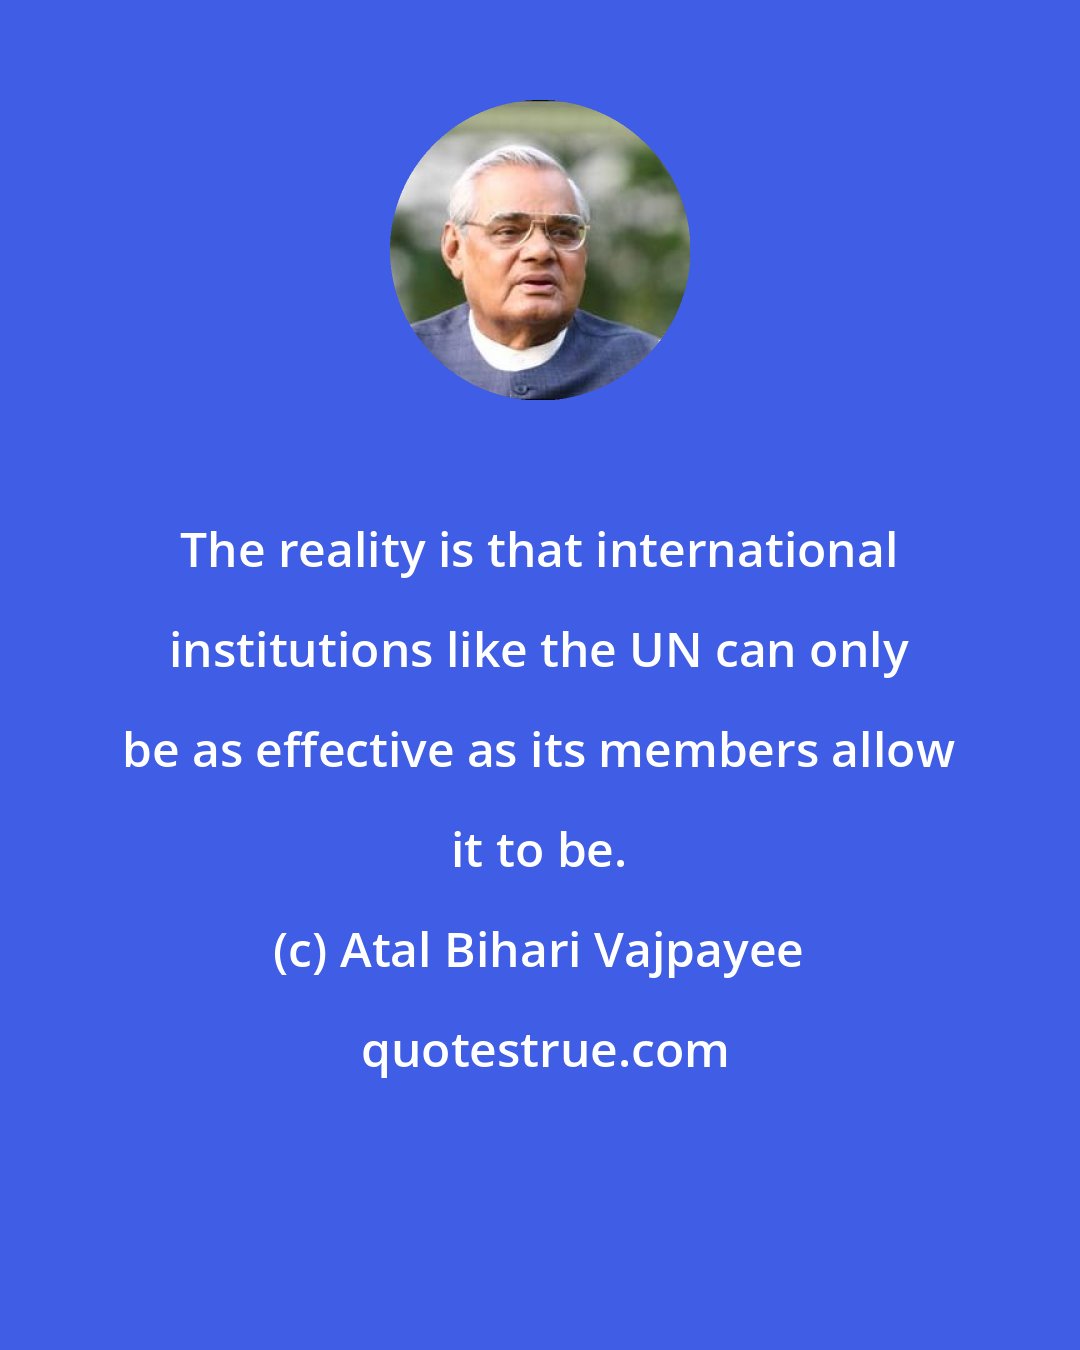 Atal Bihari Vajpayee: The reality is that international institutions like the UN can only be as effective as its members allow it to be.